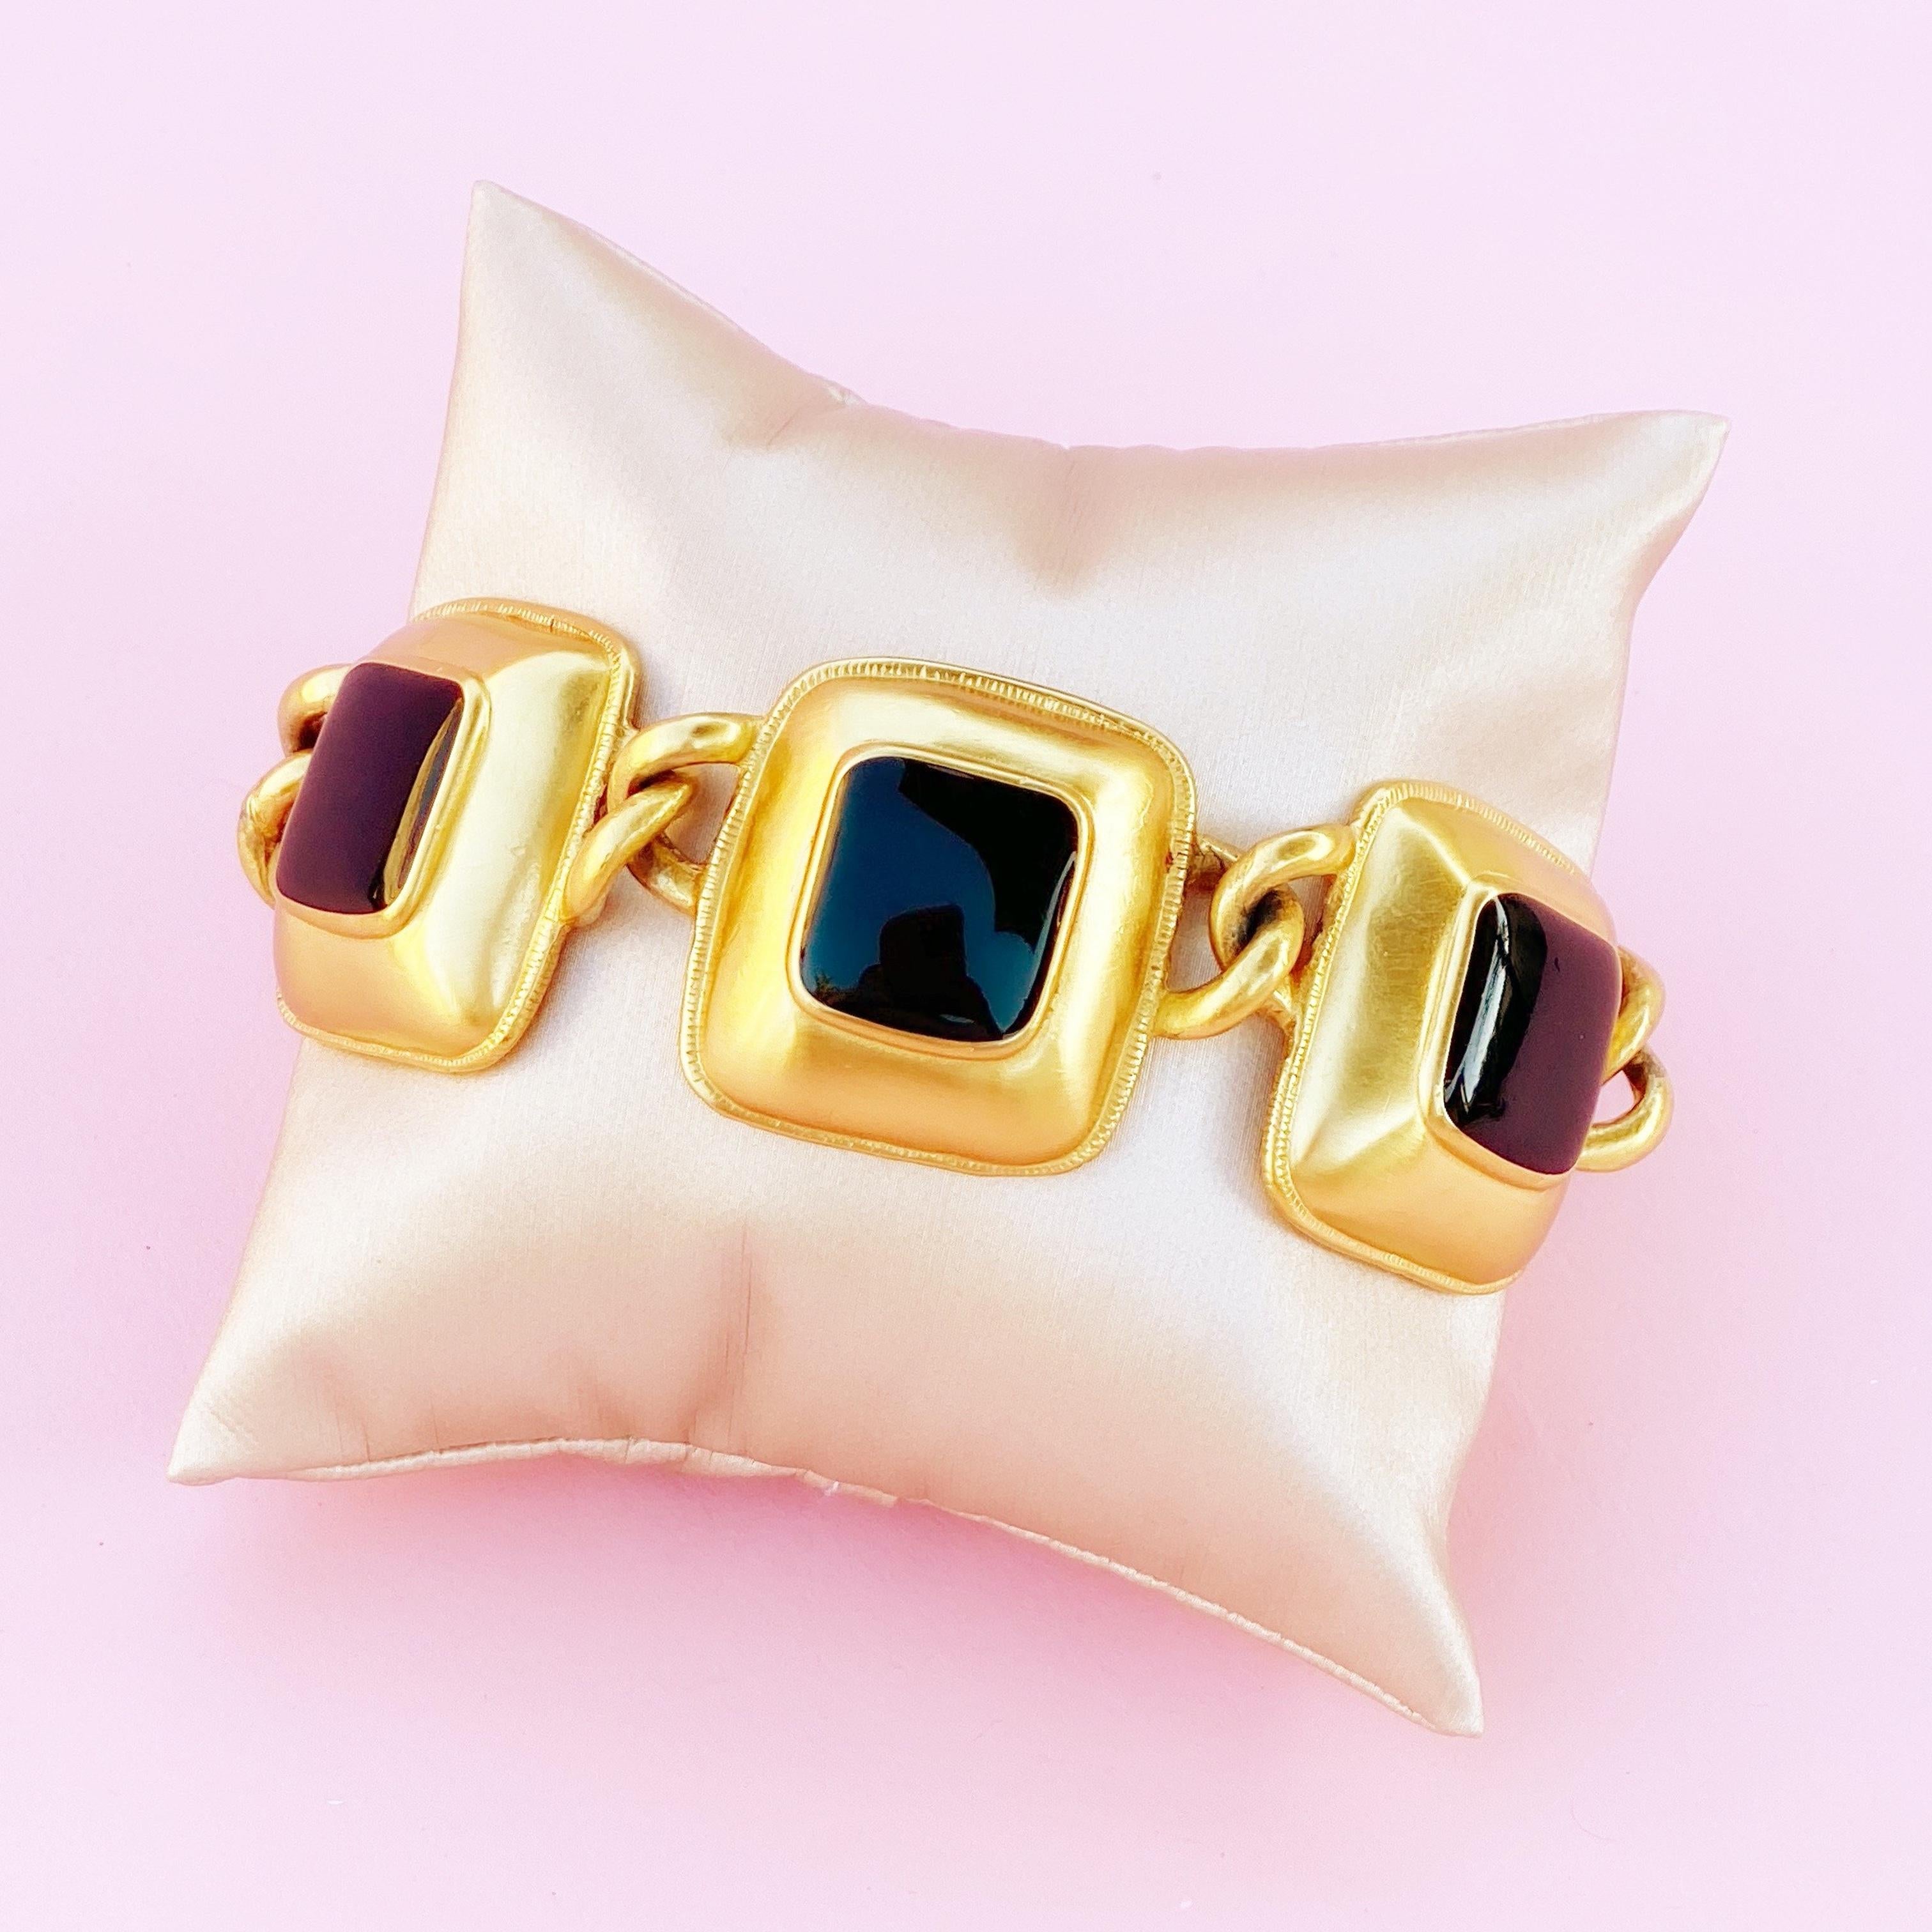 Modern Gilded Puffy Square Link Bracelet with Black Enameling By Anne Klein, 1980s